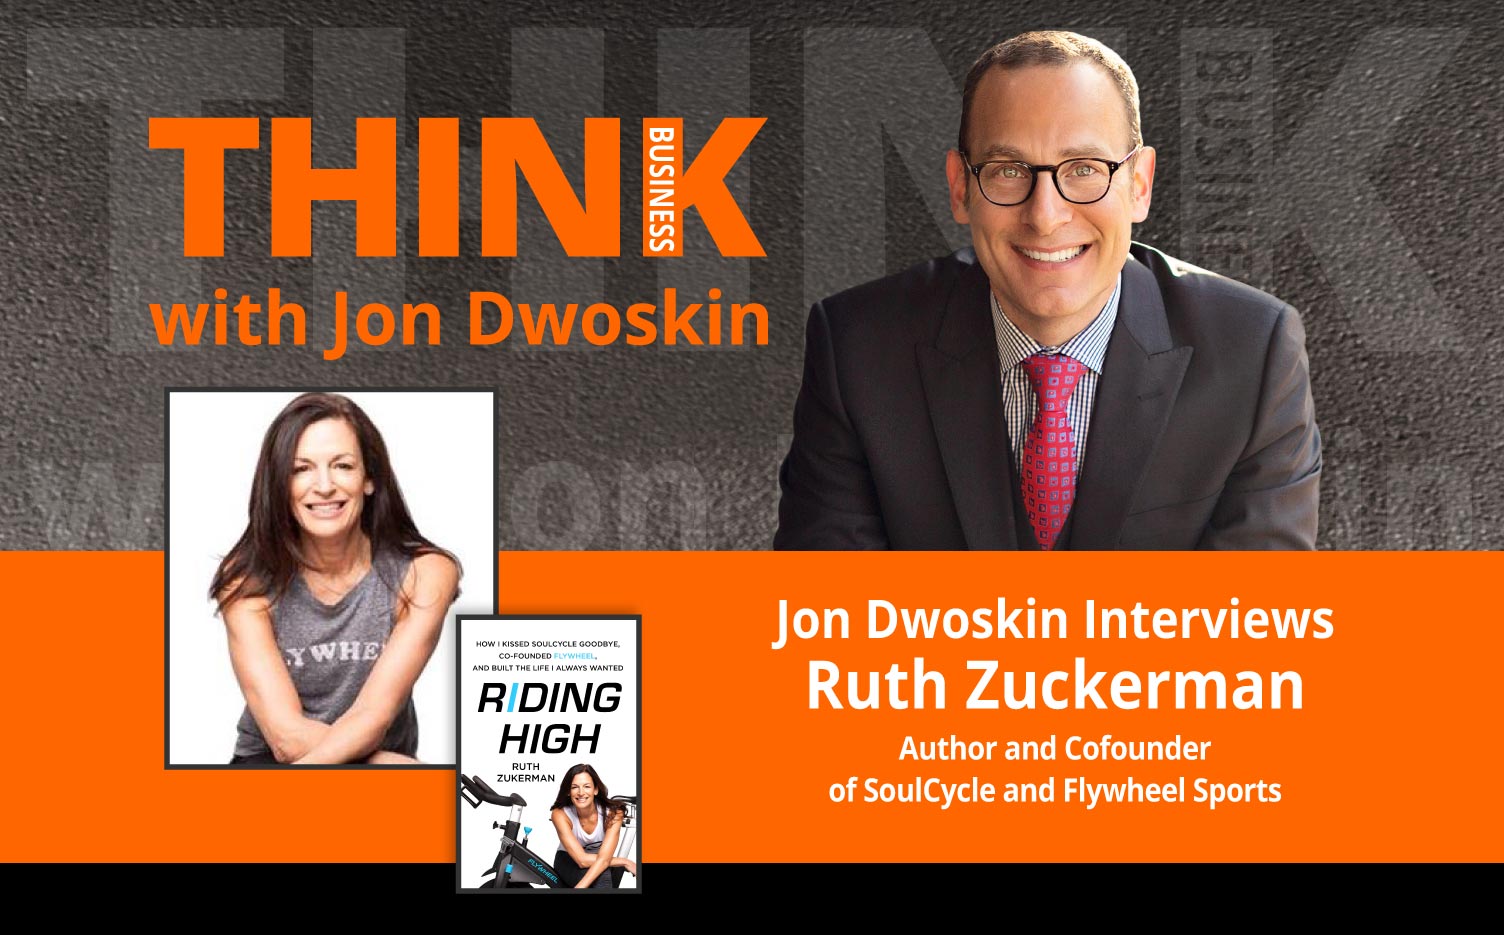 THINK Business Podcast: Jon Dwoskin Interviews Ruth Zuckerman, Author and Cofounder of SoulCycle and Flywheel